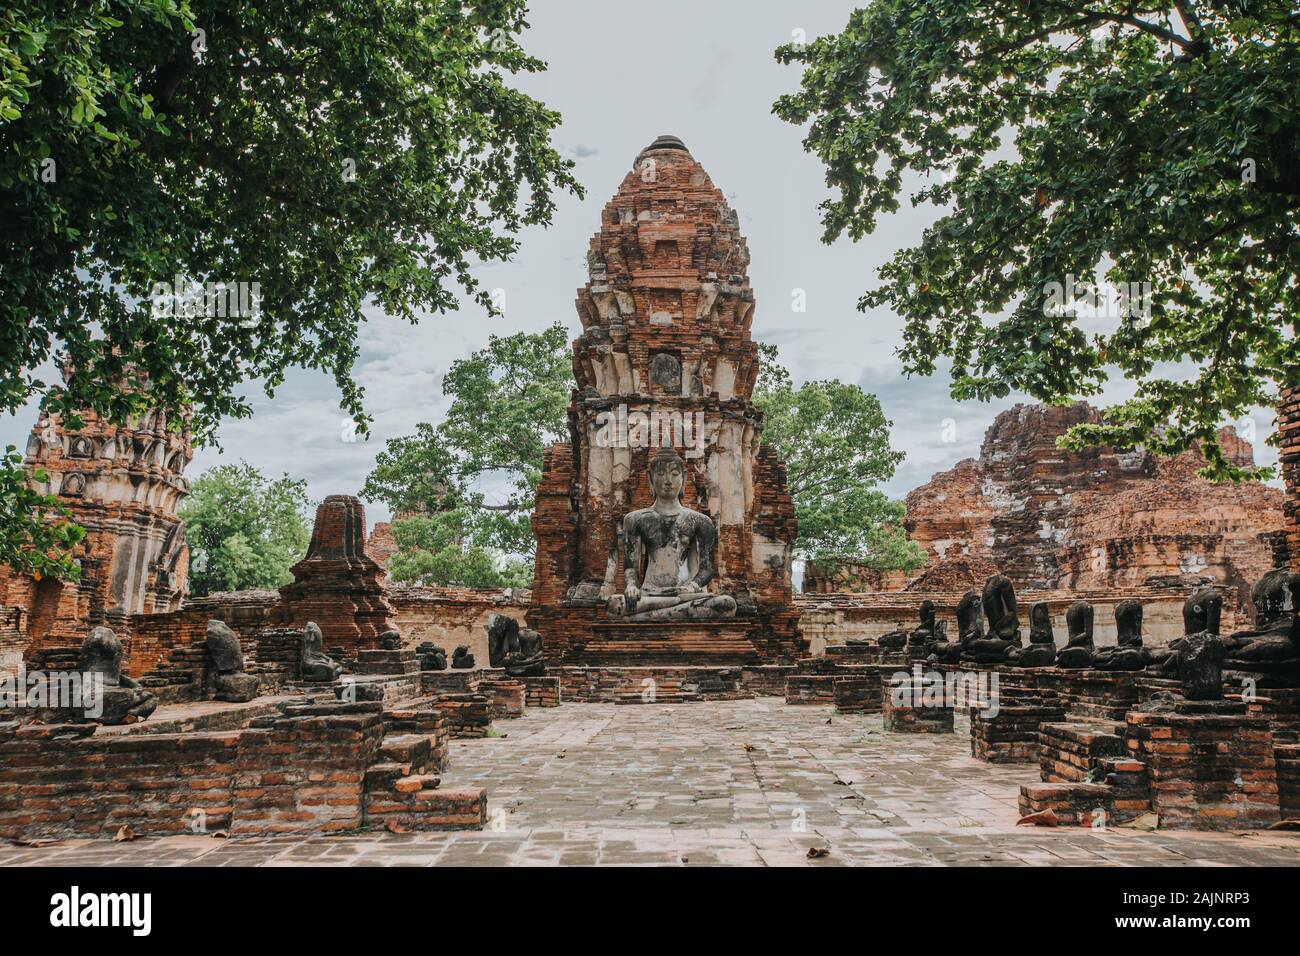 Amazing details of the Wat Maha That temple with the ruins of the Buddha statues. Stock Photo